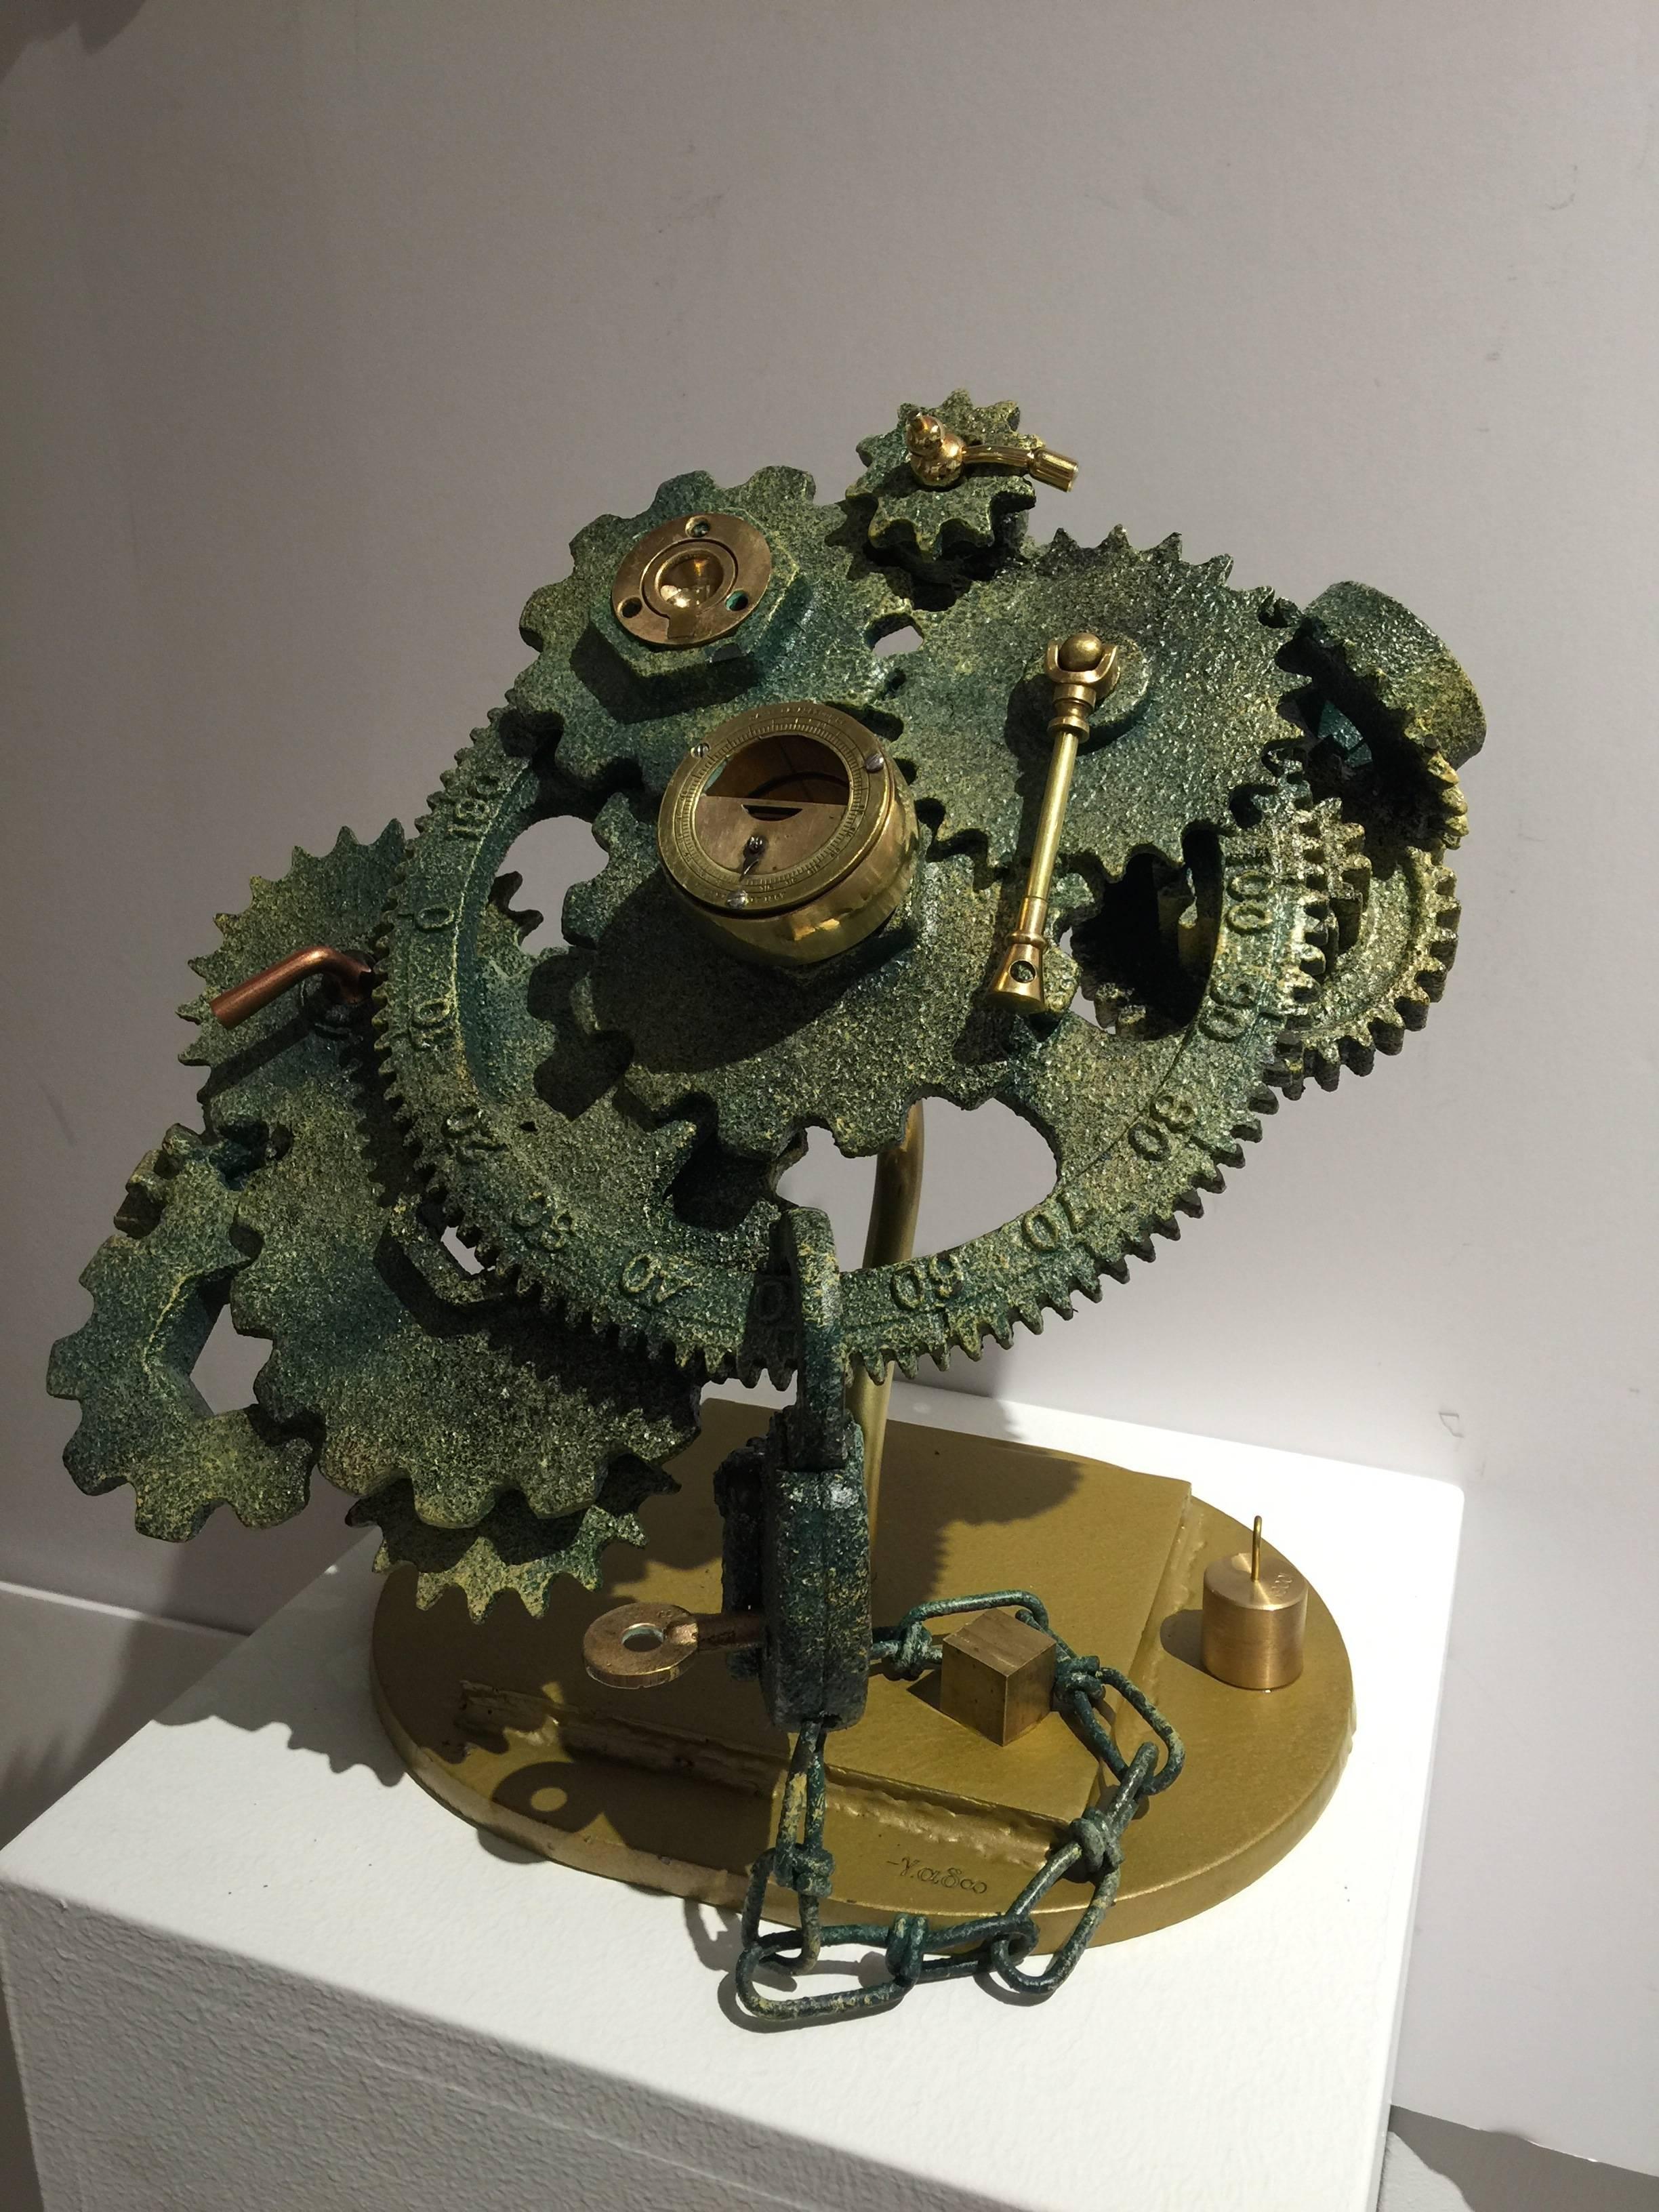 Art-ikythera Mechanism - Sculpture by Terry Poulos